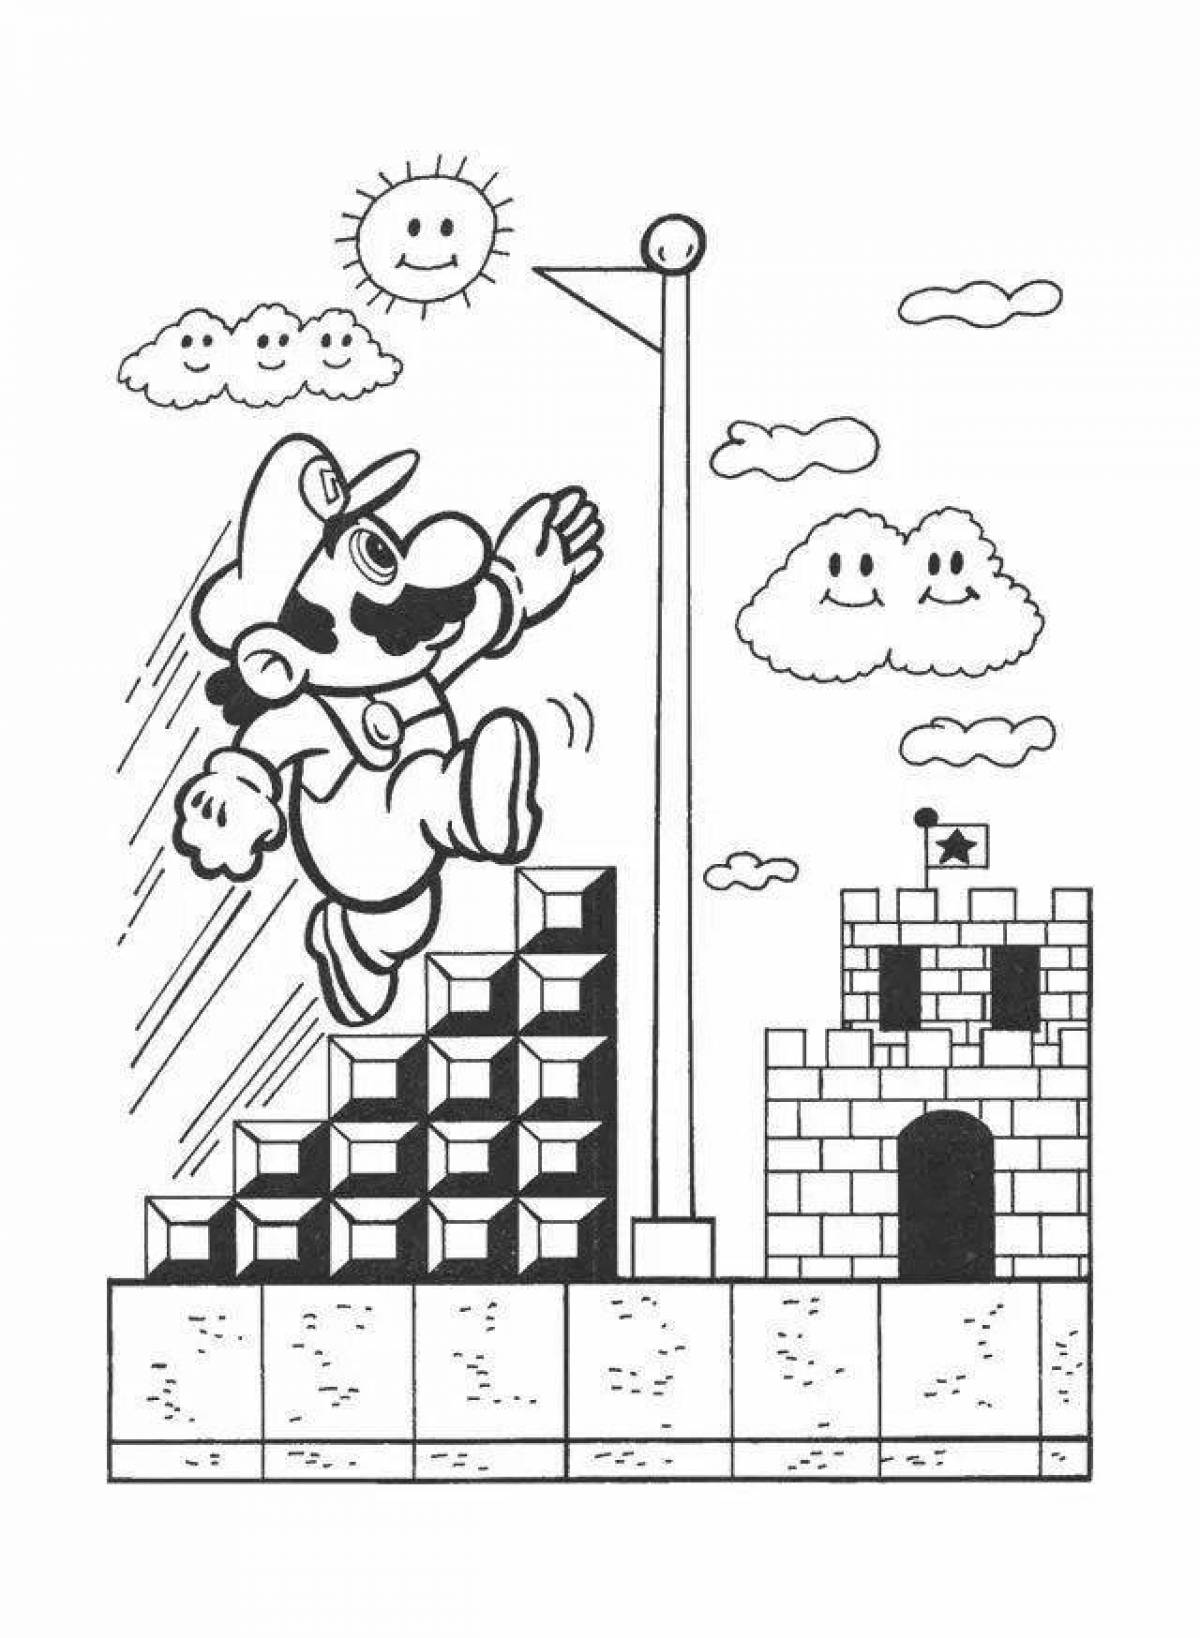 Mario for kids #3